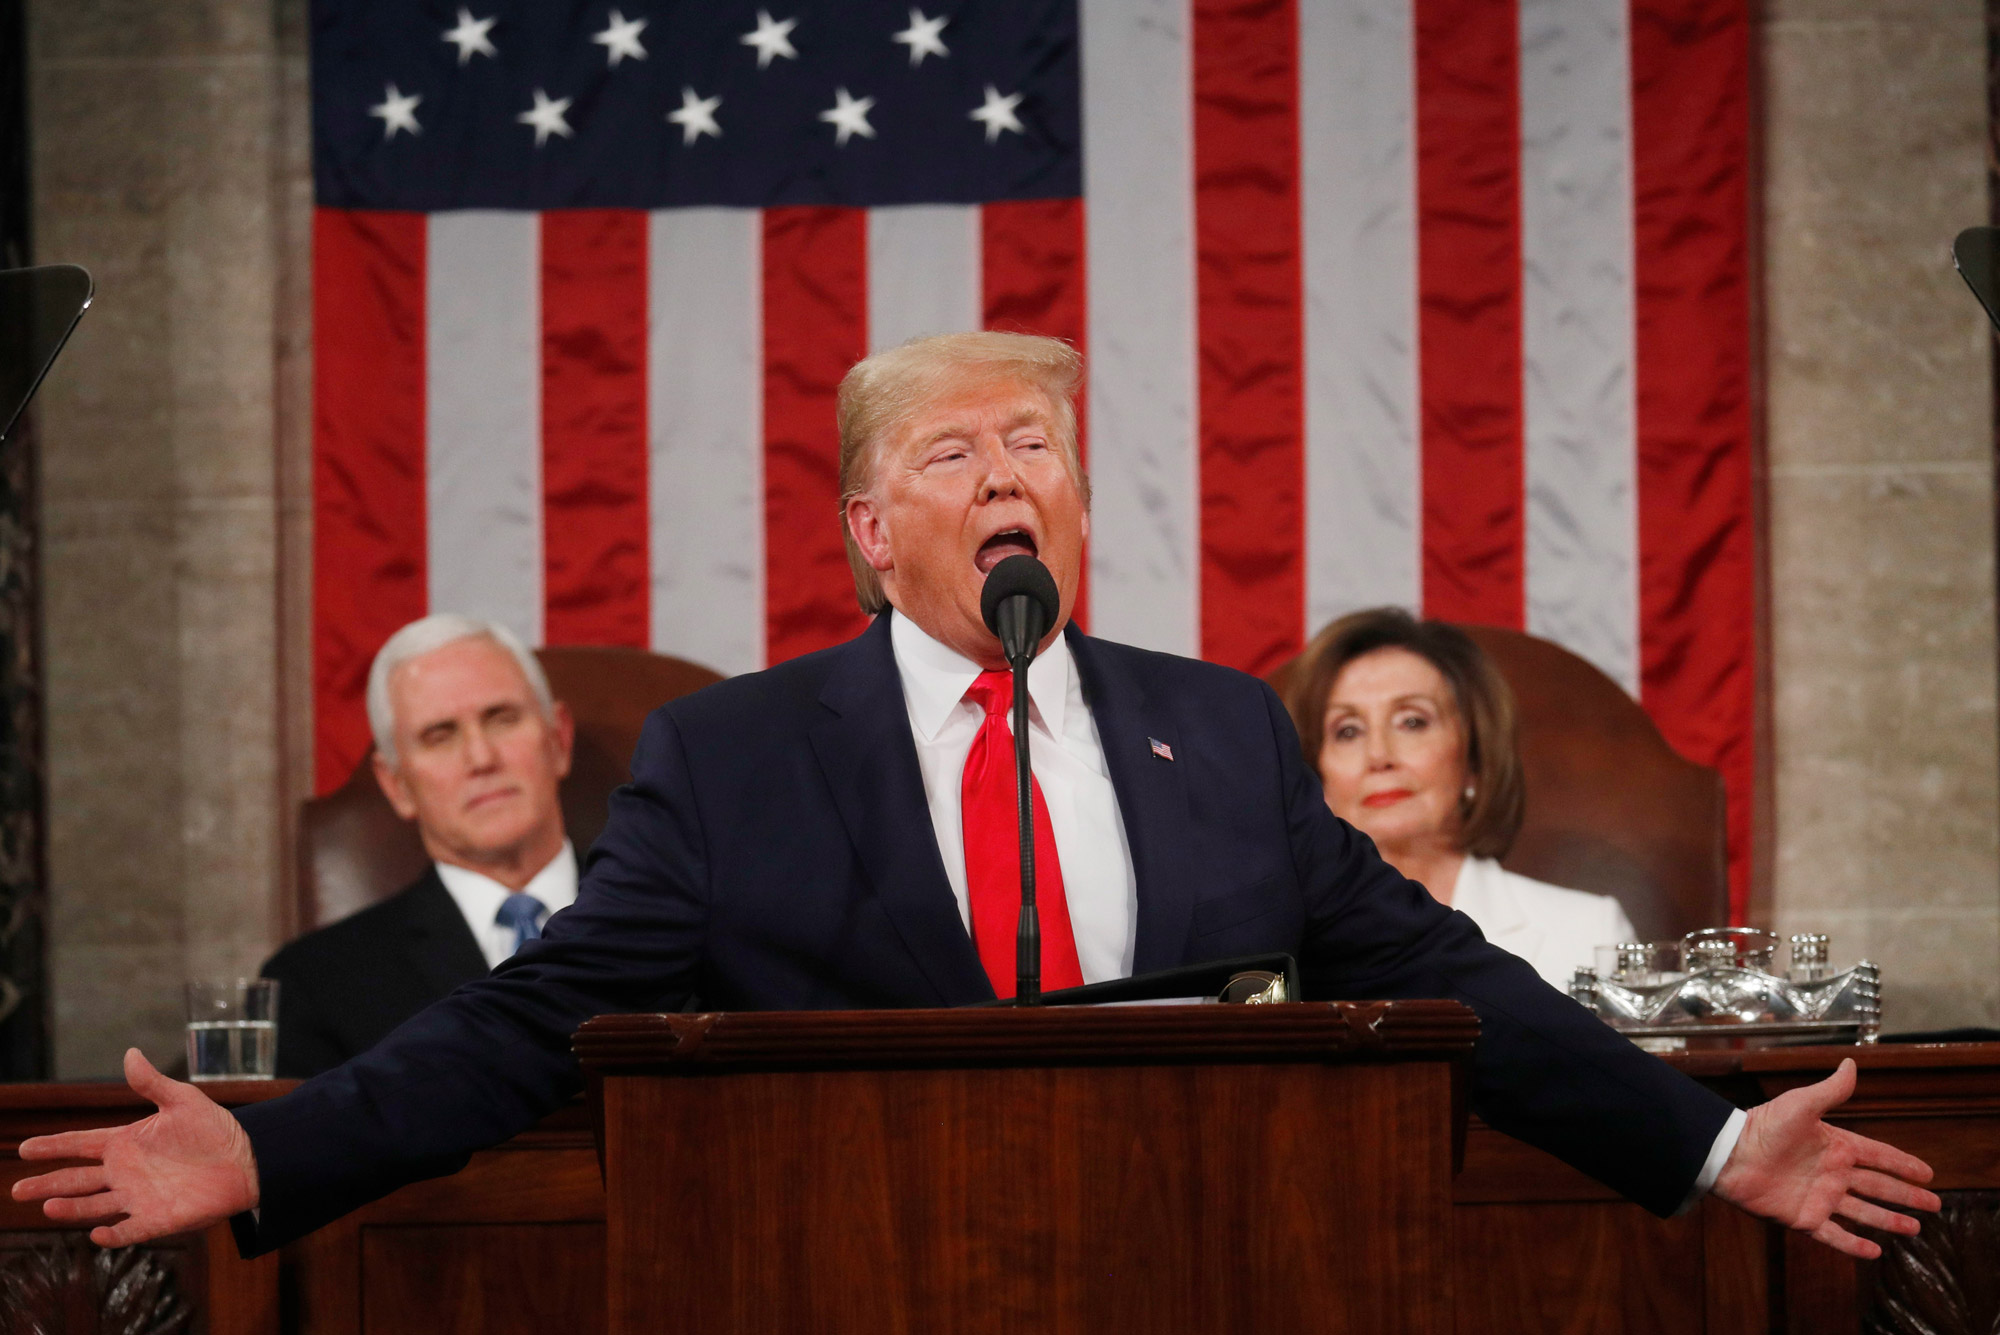 A photo of President Donald Trump at the State of the Union.